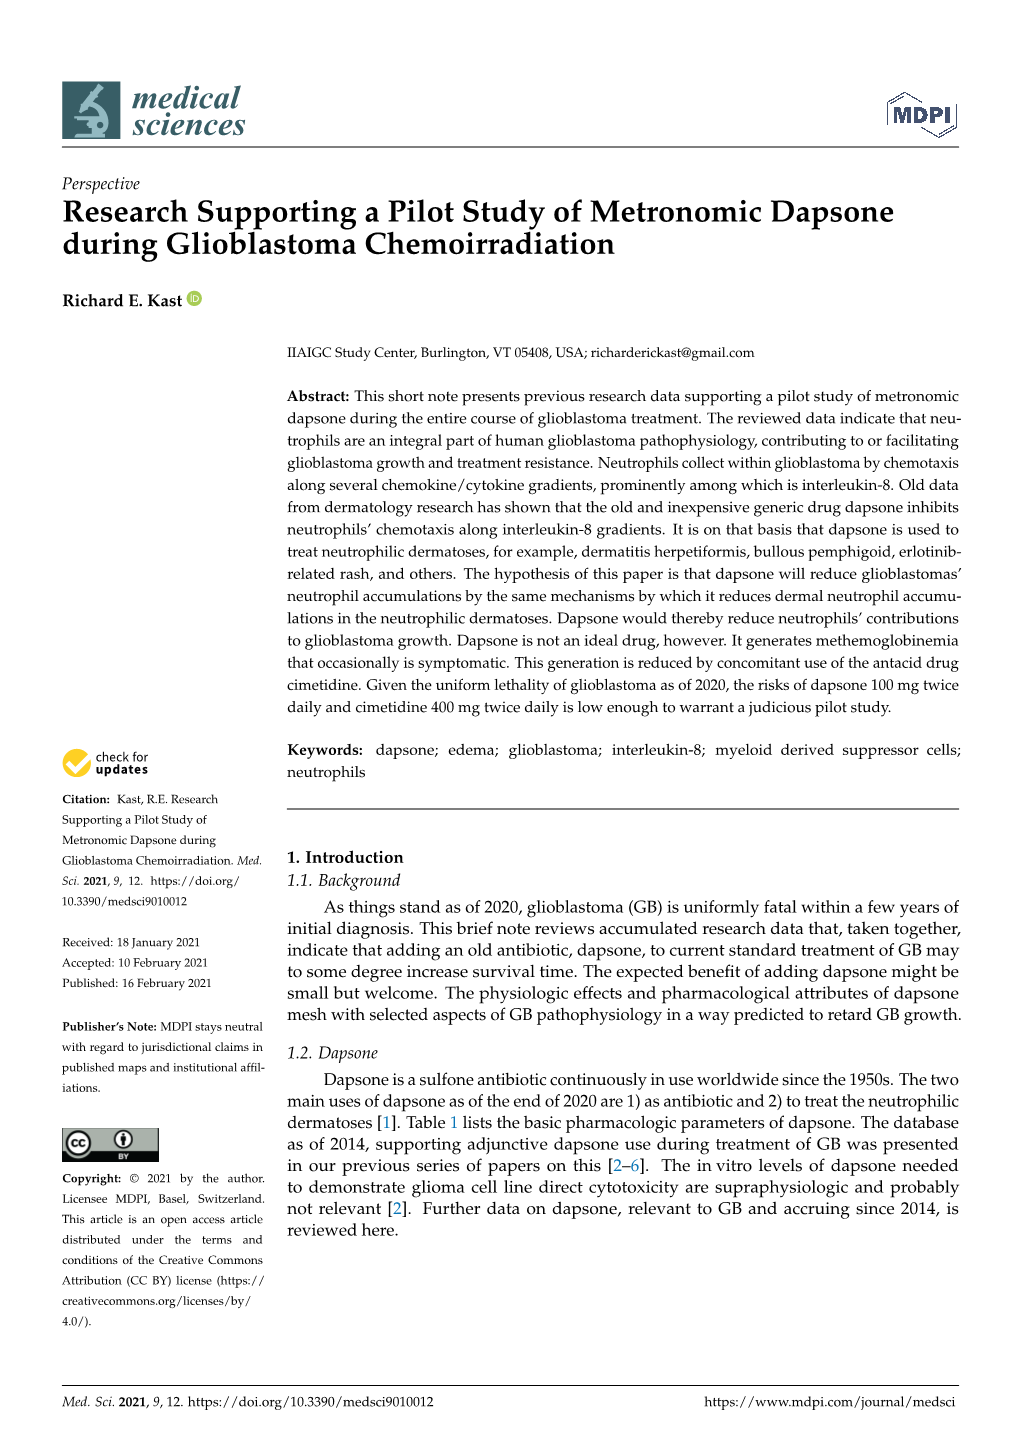 Research Supporting a Pilot Study of Metronomic Dapsone During Glioblastoma Chemoirradiation